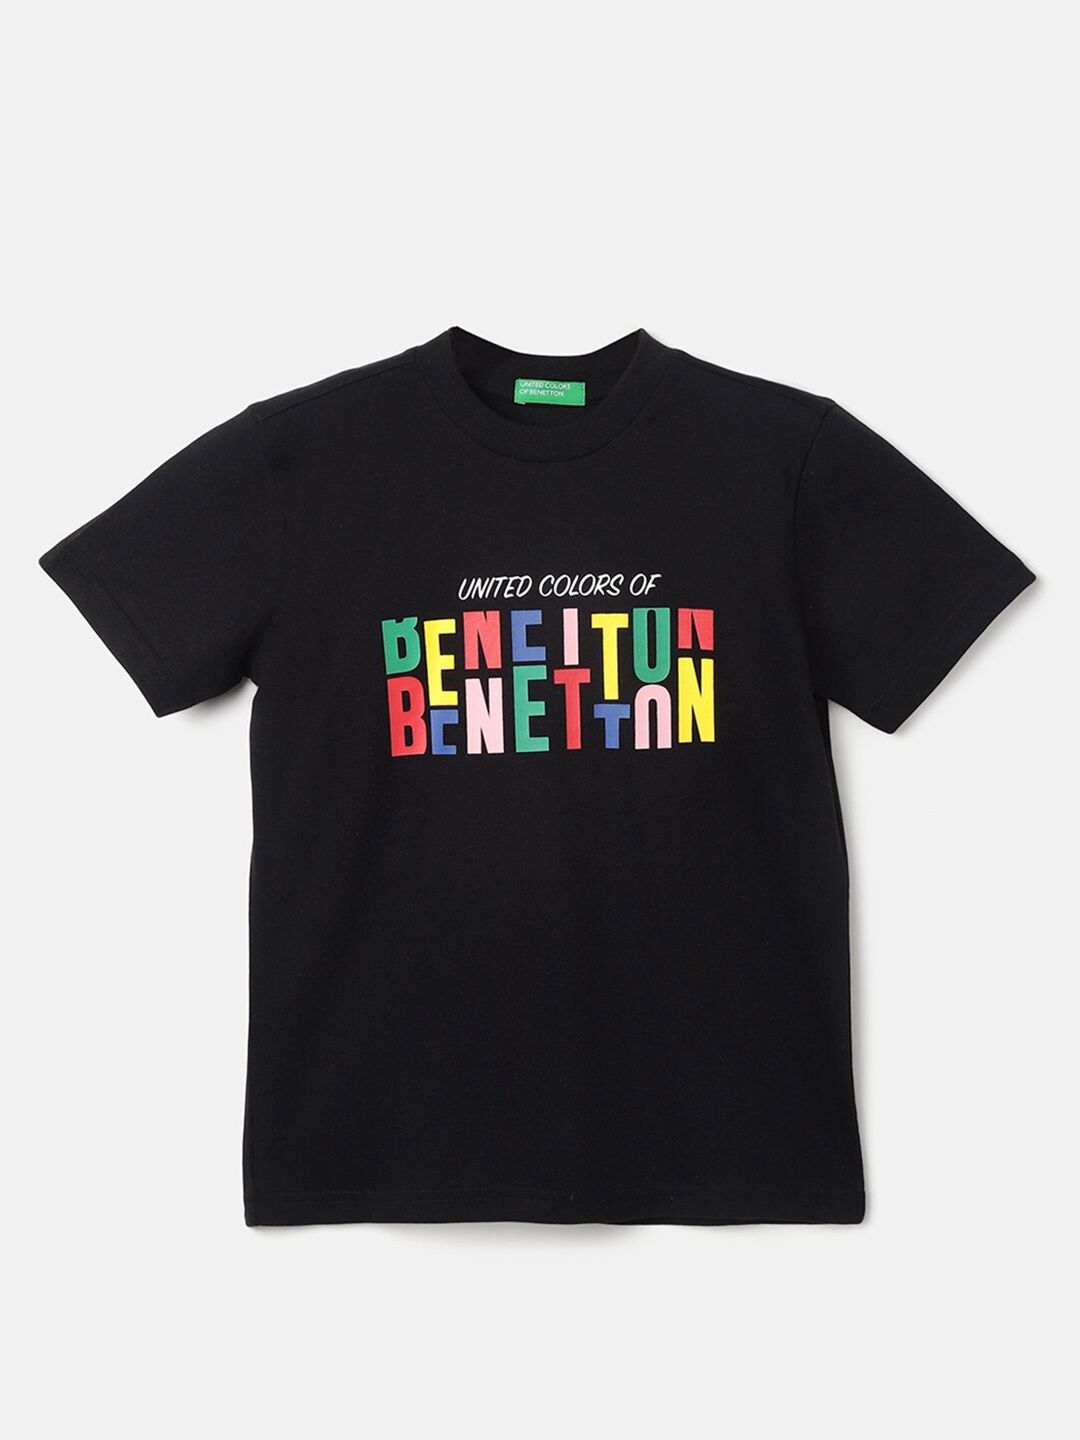 

United Colors of Benetton Boys Typography Printed Pure Cotton T-shirt, Black